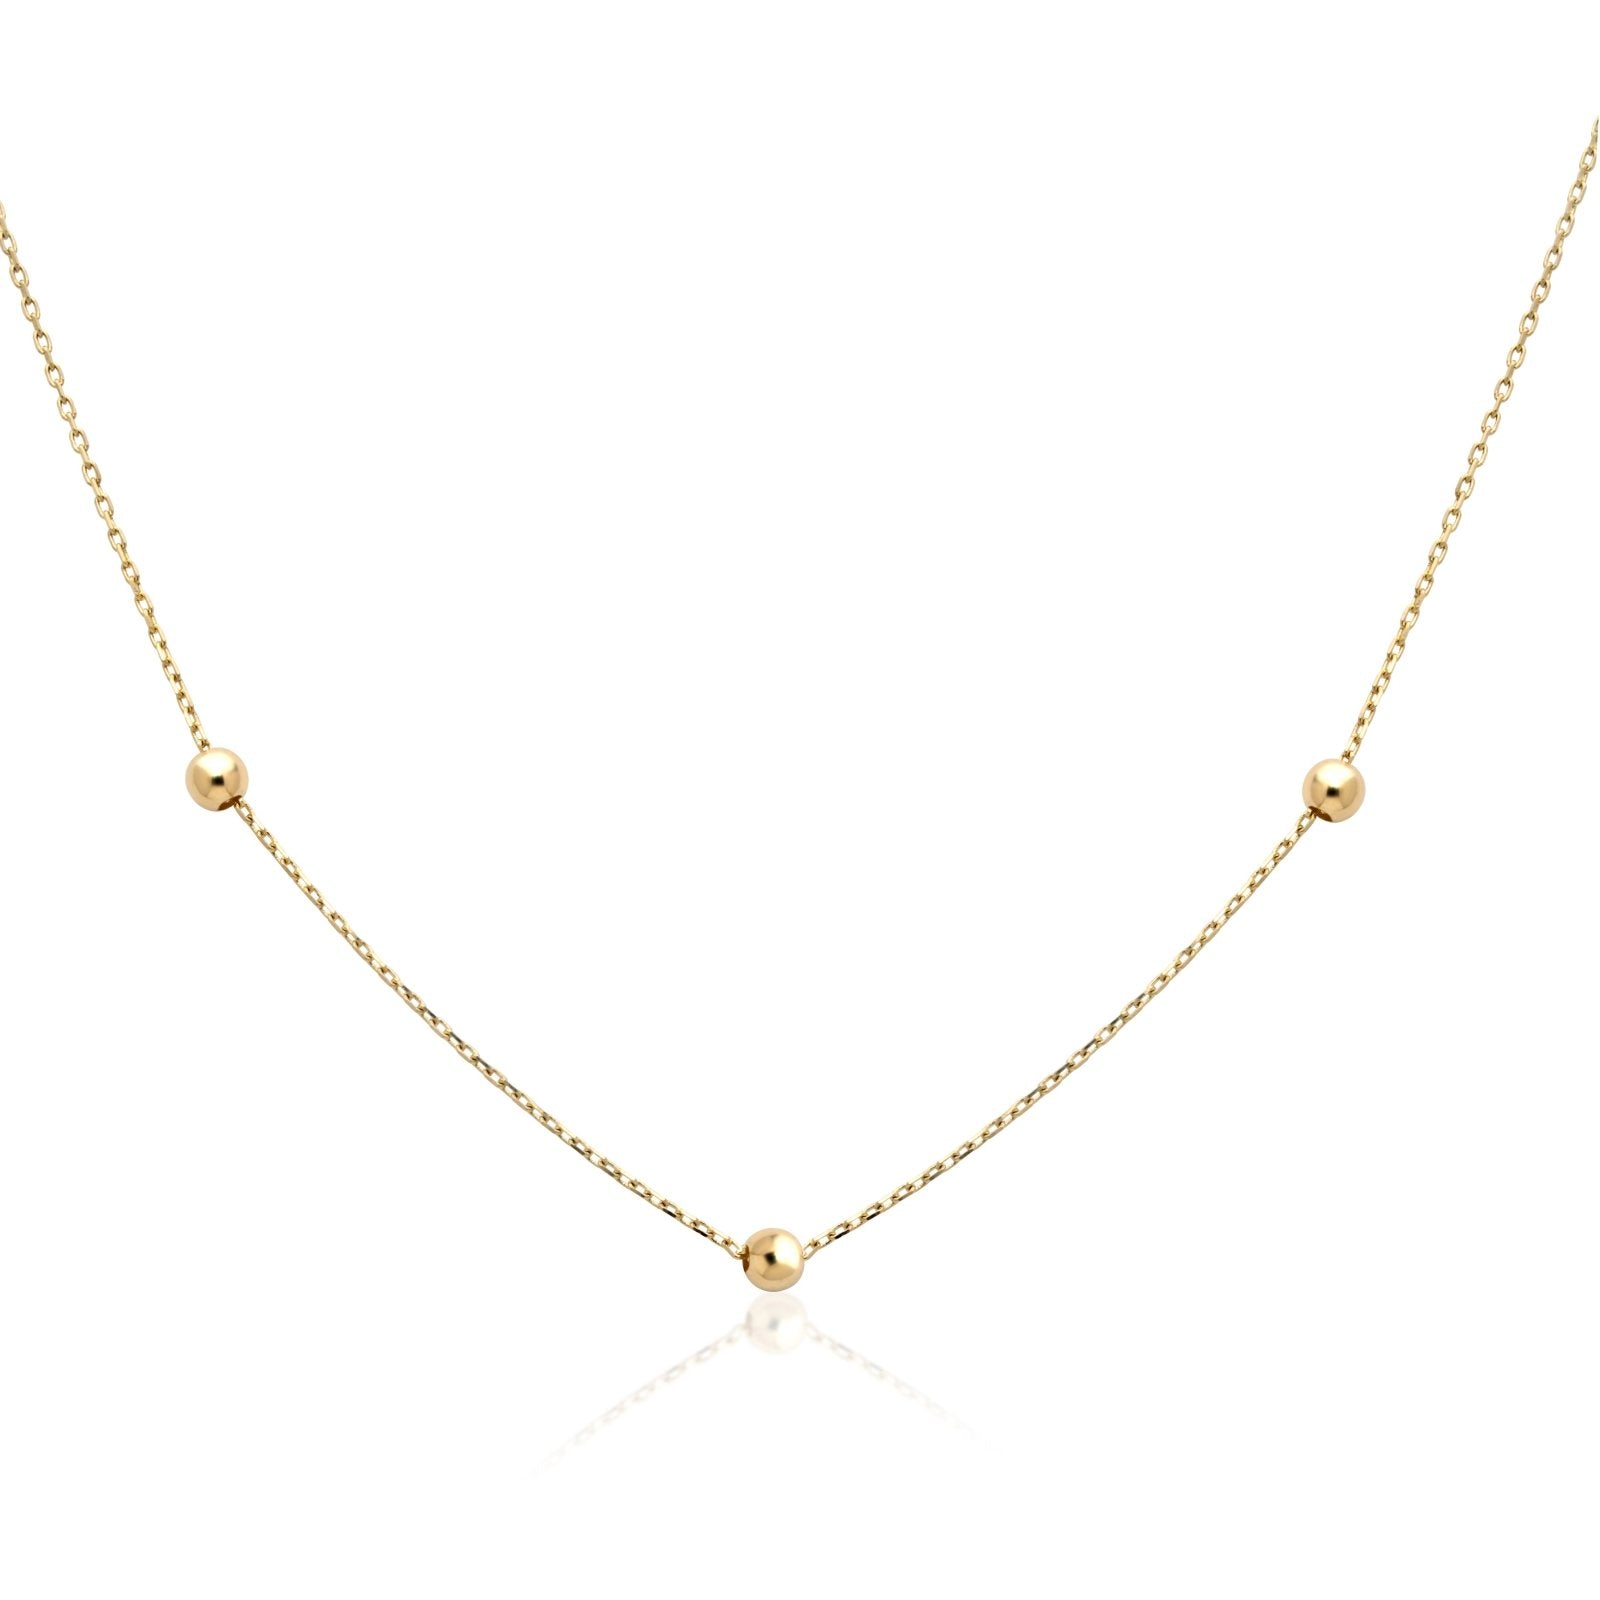 Beaded Station Necklace Necklaces Estella Collection #product_description# 14k Layering Necklace Make Collection #tag4# #tag5# #tag6# #tag7# #tag8# #tag9# #tag10#